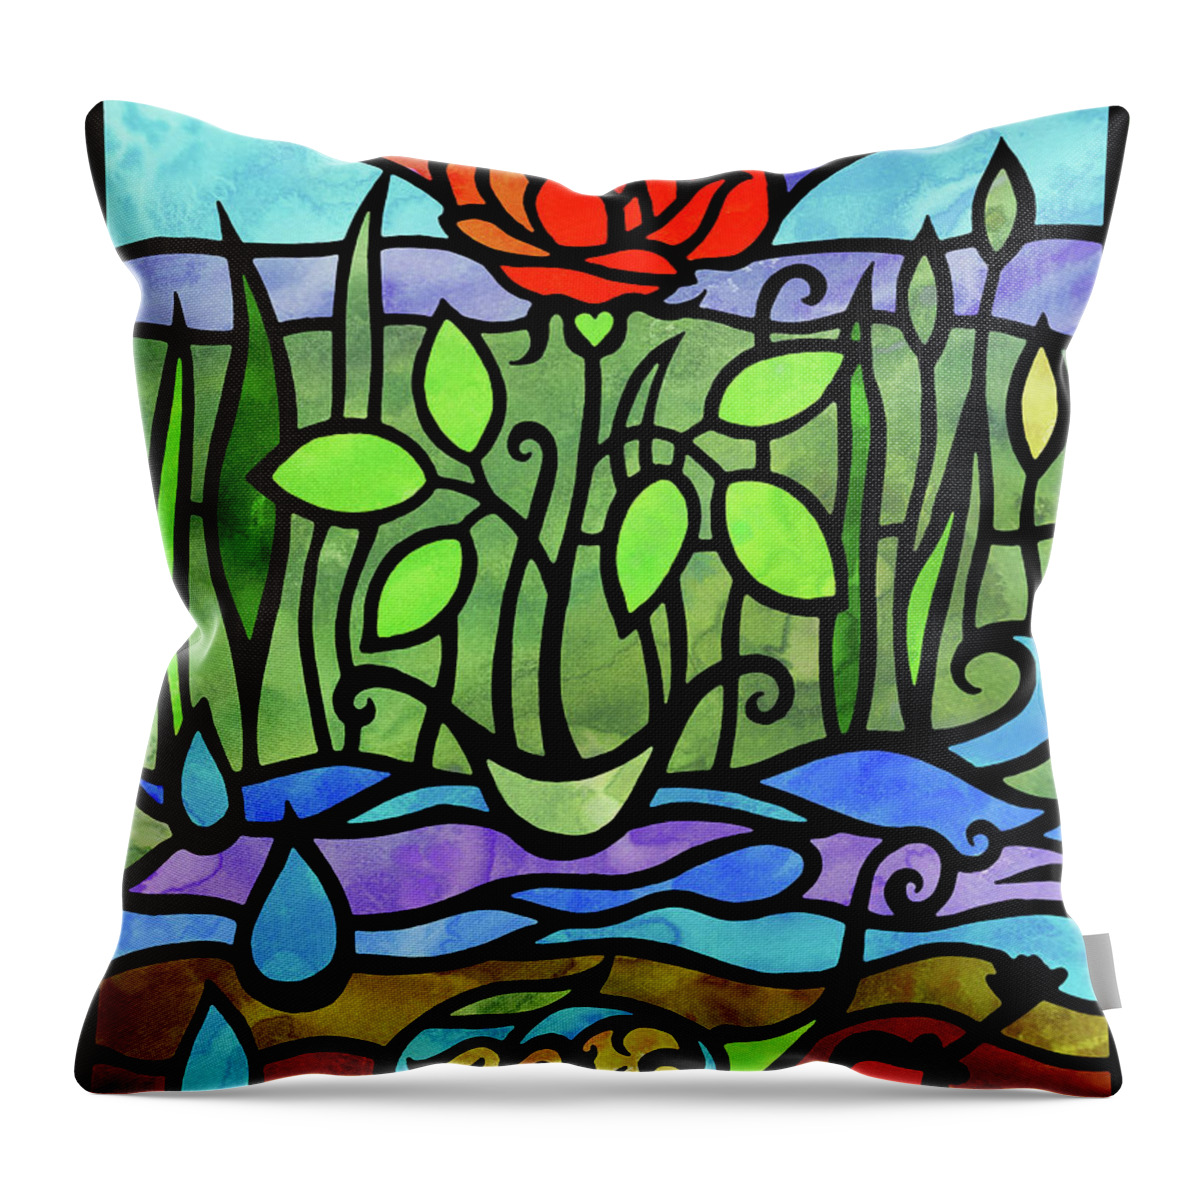 Tiffany Throw Pillow featuring the painting The Seed Of Love In Rose Garden Stained Glass Tiffany Style Watercolor by Irina Sztukowski